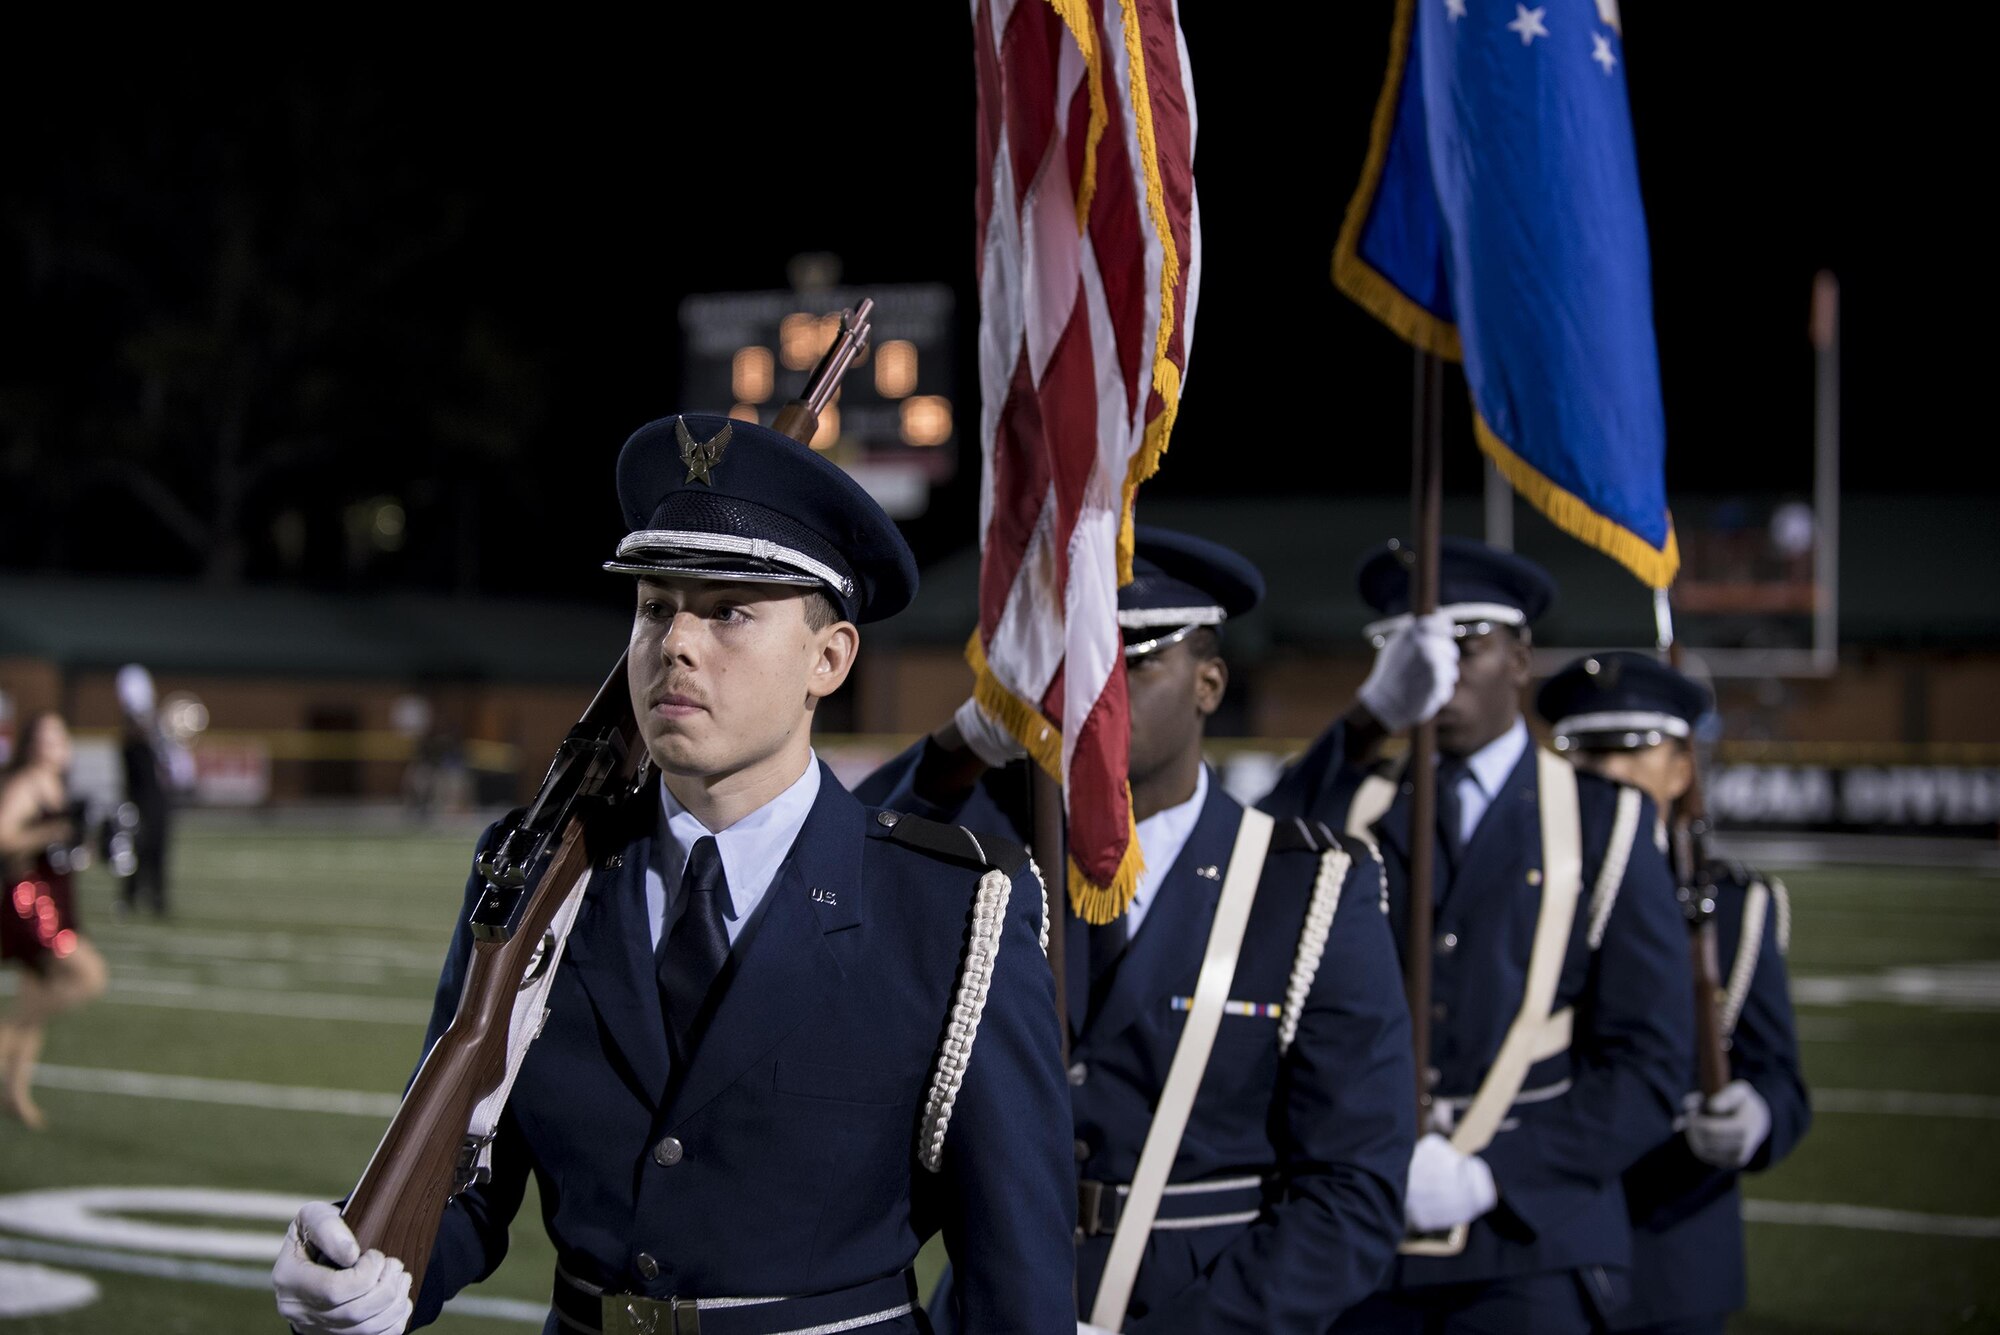 Members of the Air Force Reserve Officer Training Corps, Detachment 172 from Valdosta State University, present the colors before the start of a VSU military appreciation game, Nov. 12, in Valdosta, Ga. Veterans were invited to stand and be honored as their branch’s song was performed by the VSU band. (U.S. Air Force photo by Airman 1st Class Daniel Snider)